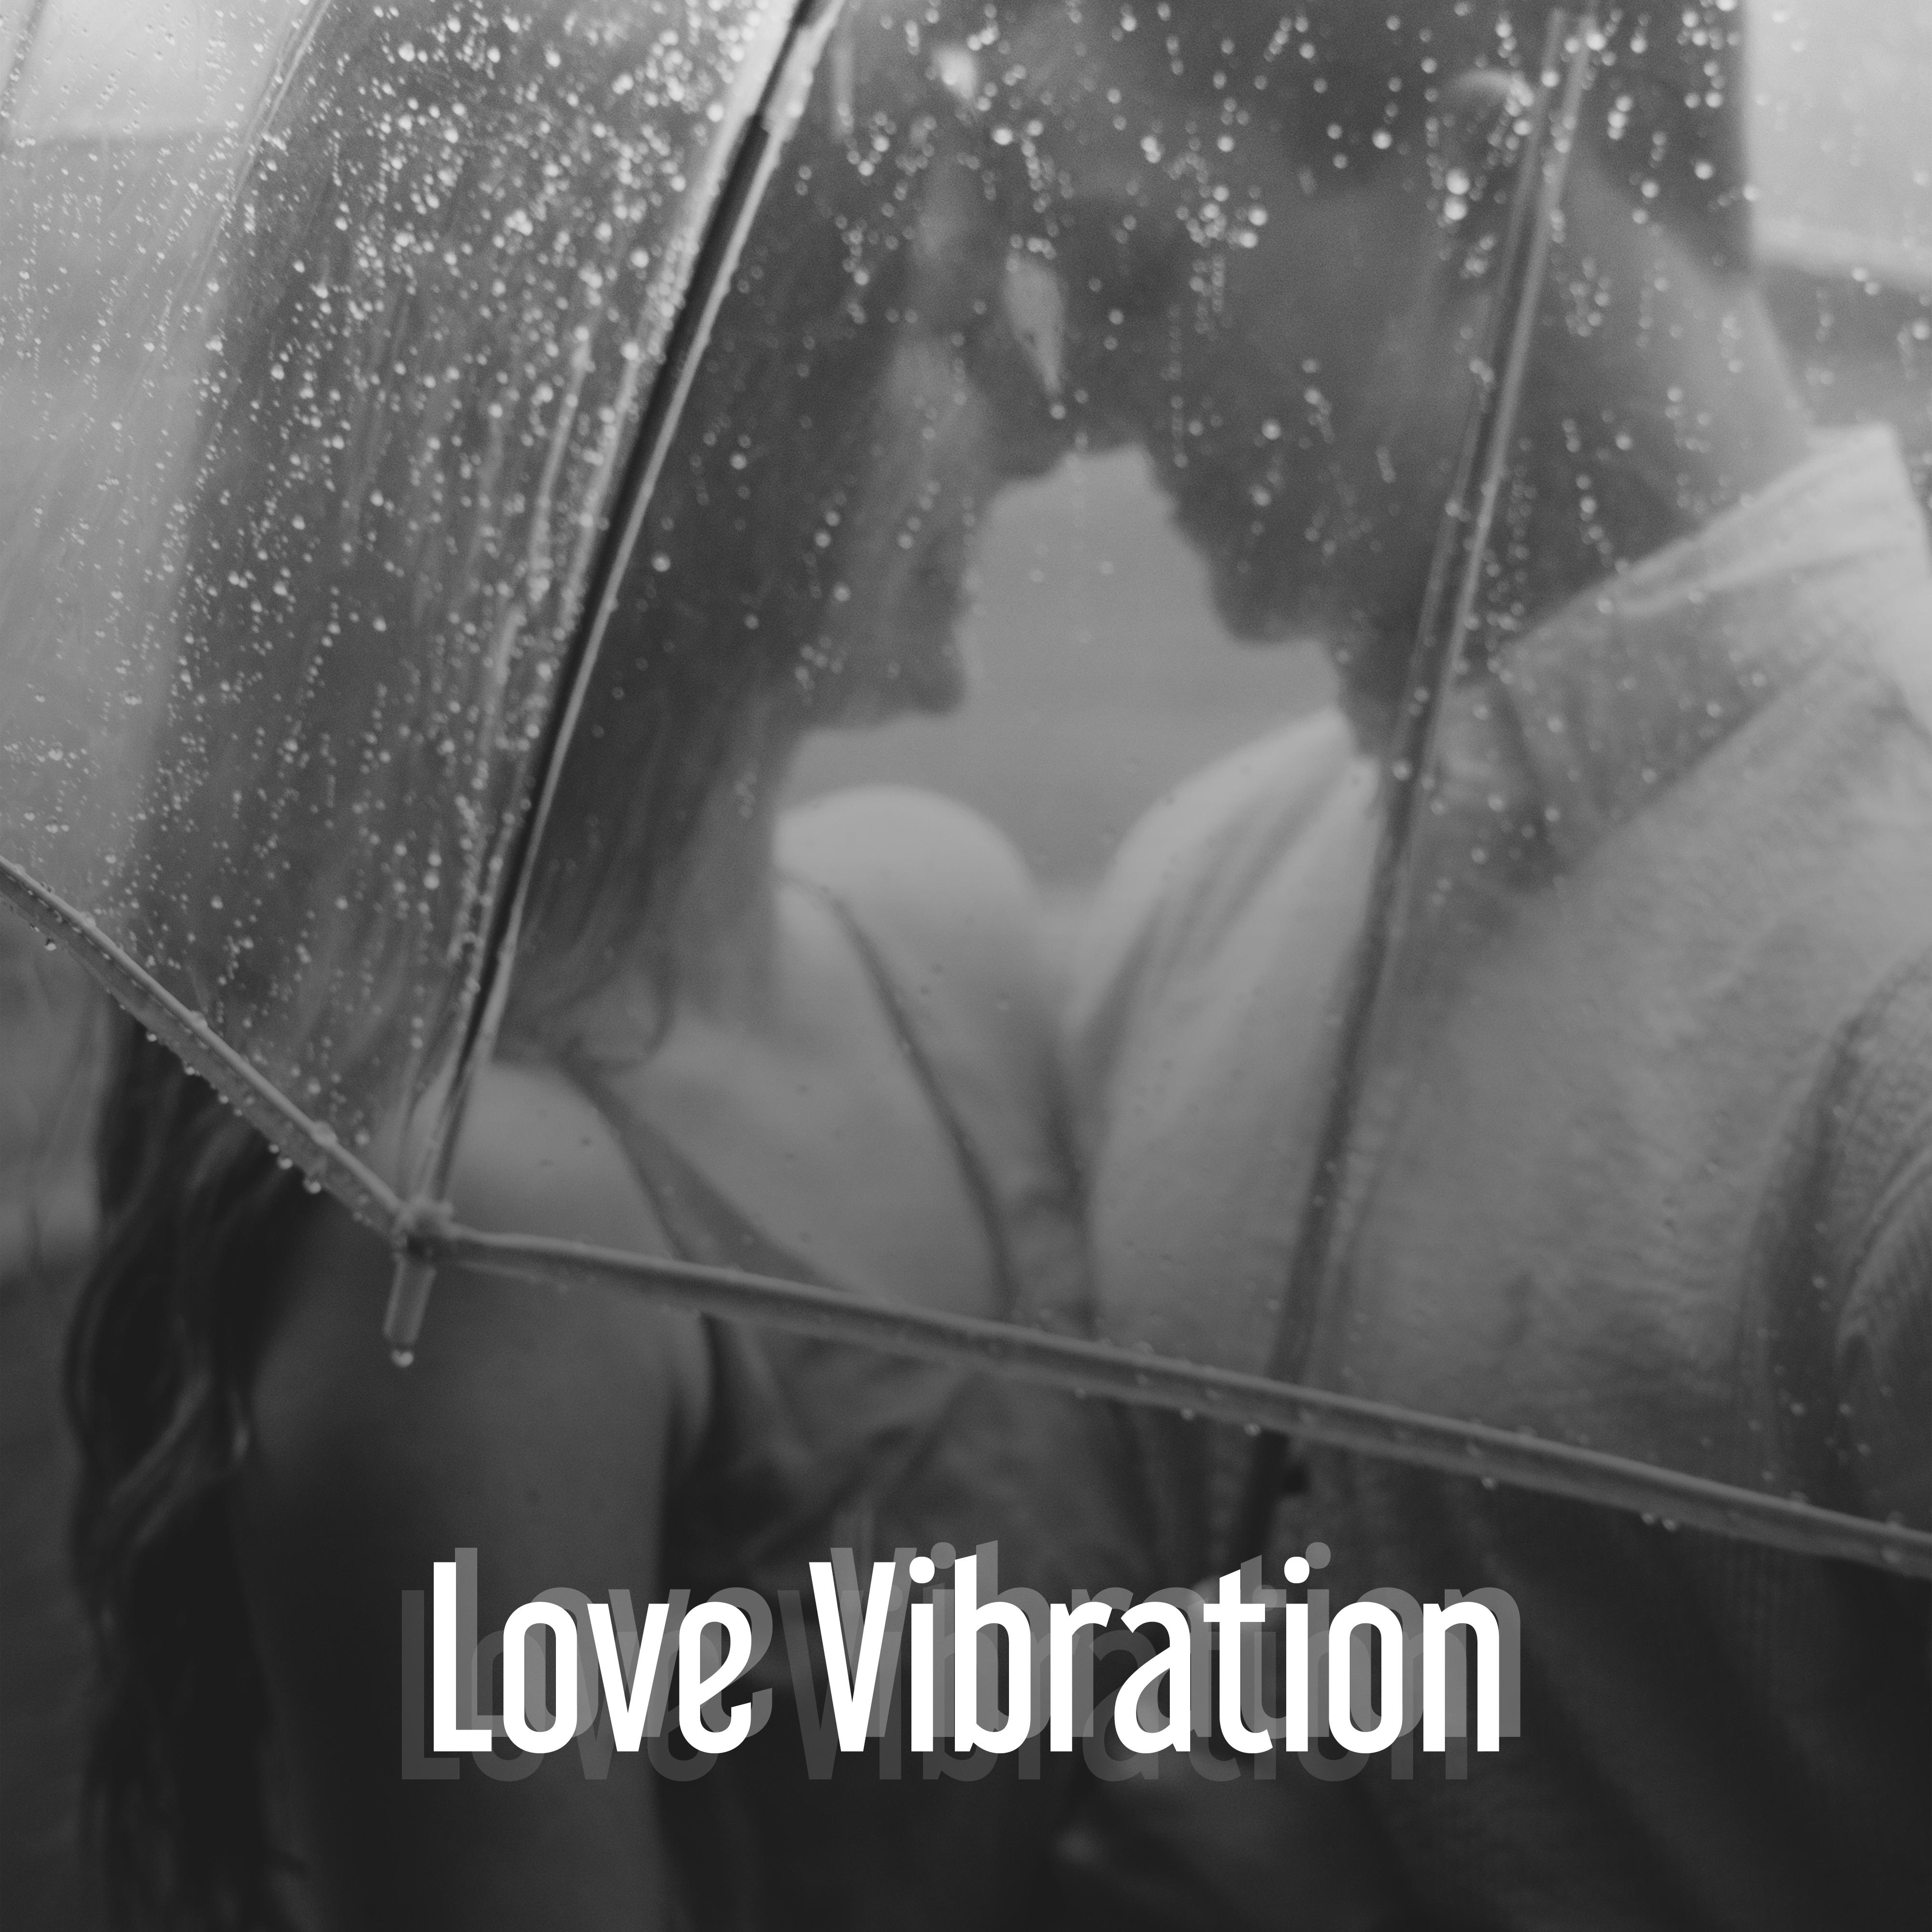 Love Vibration – Sensual Jazz Music, Relaxation Sounds, Romantic Evening, Soothing Piano Jazz, Intimate Time